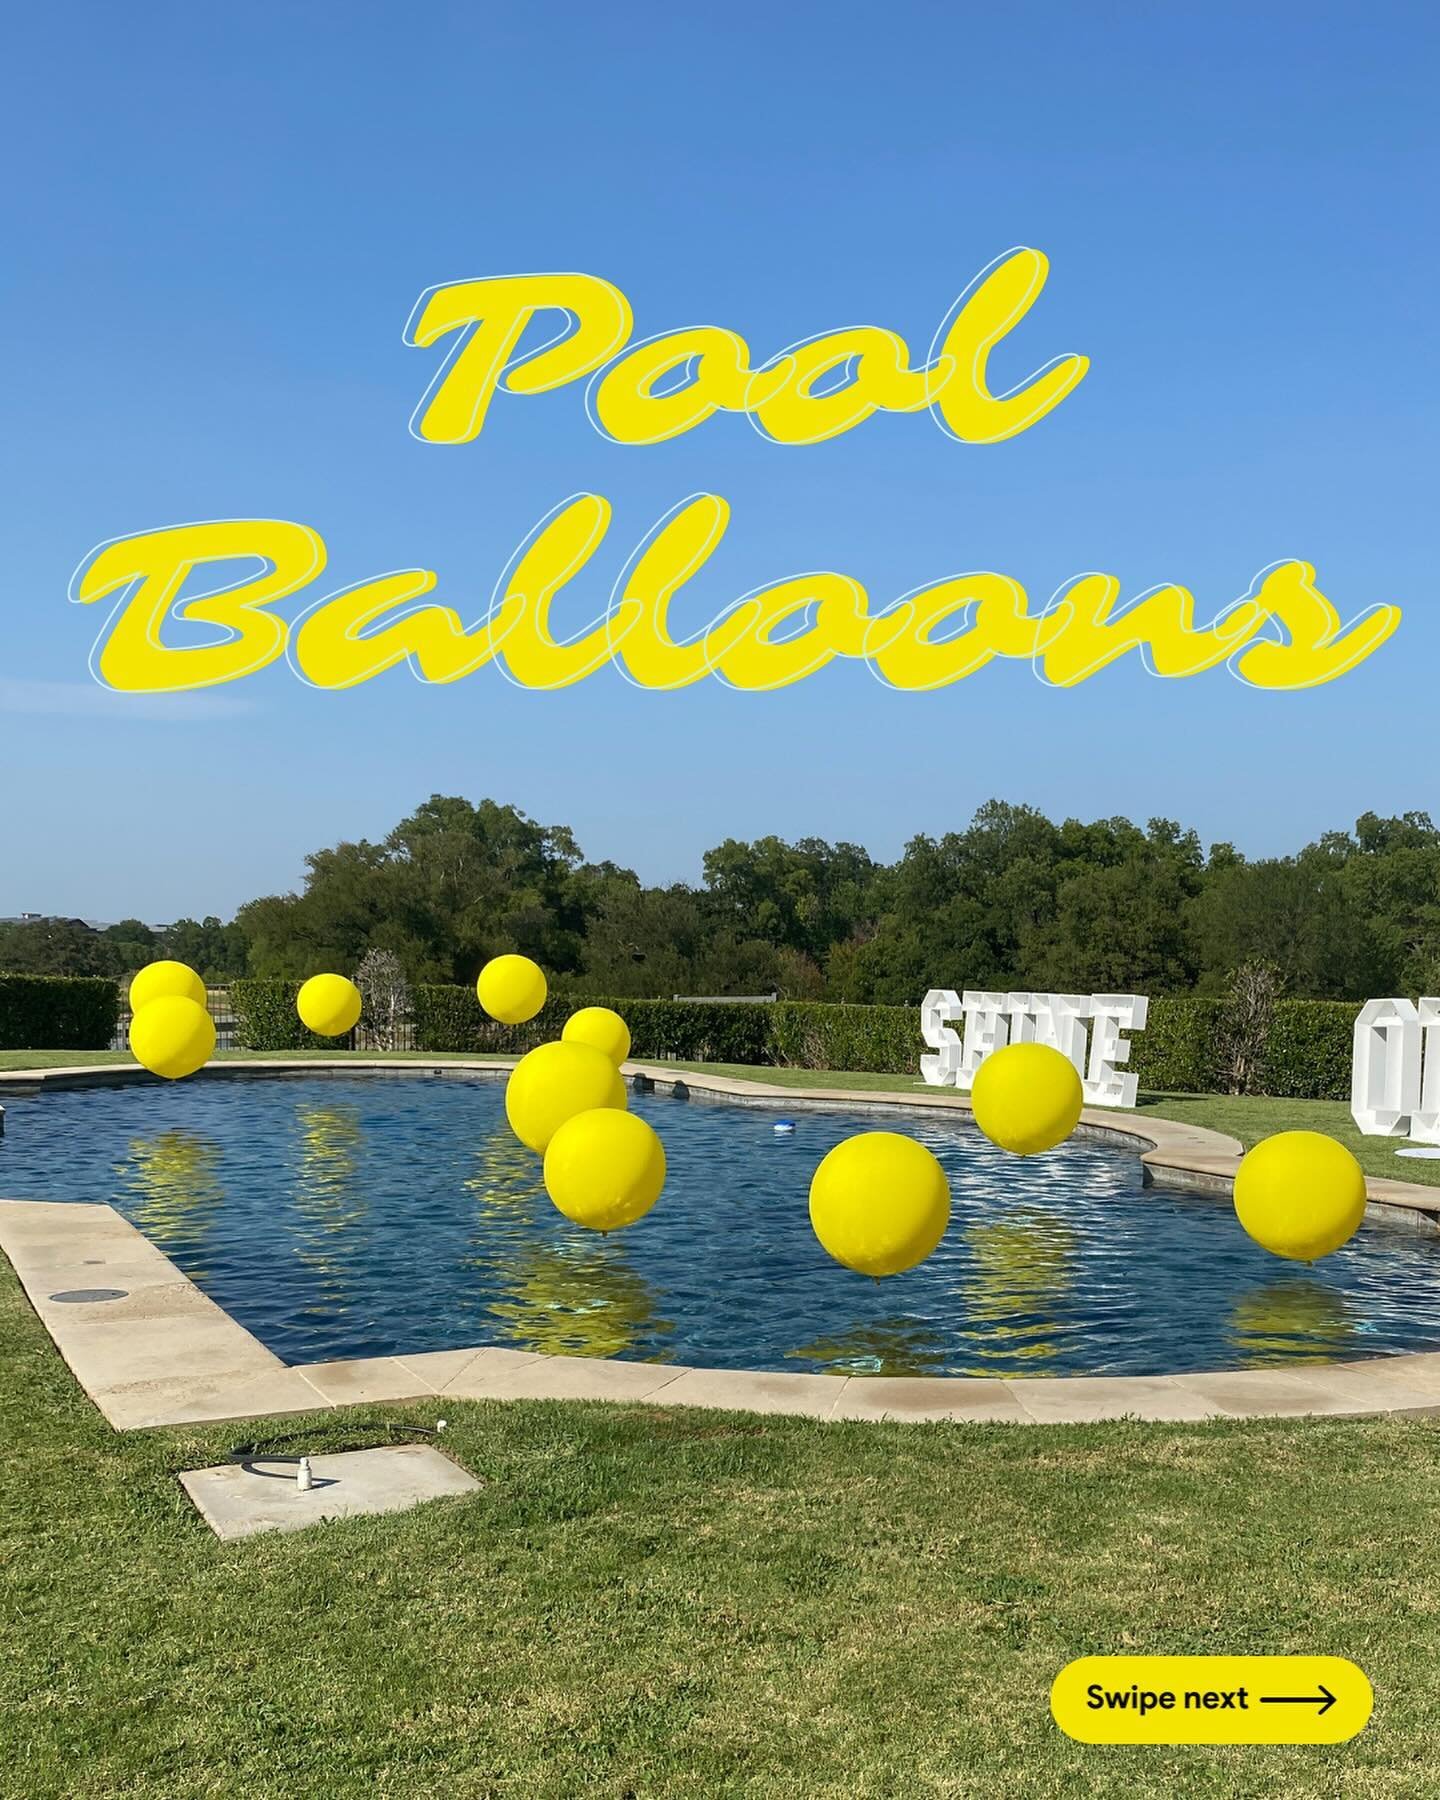 🌸 Spring has sprung, and outdoor parties are in full bloom! 

Take your outdoor gatherings to the next level with our fabulous pool balloons! 

No pool? No problem! From vibrant floating creations to elegant poolside decor, let Up Up Balloons make a